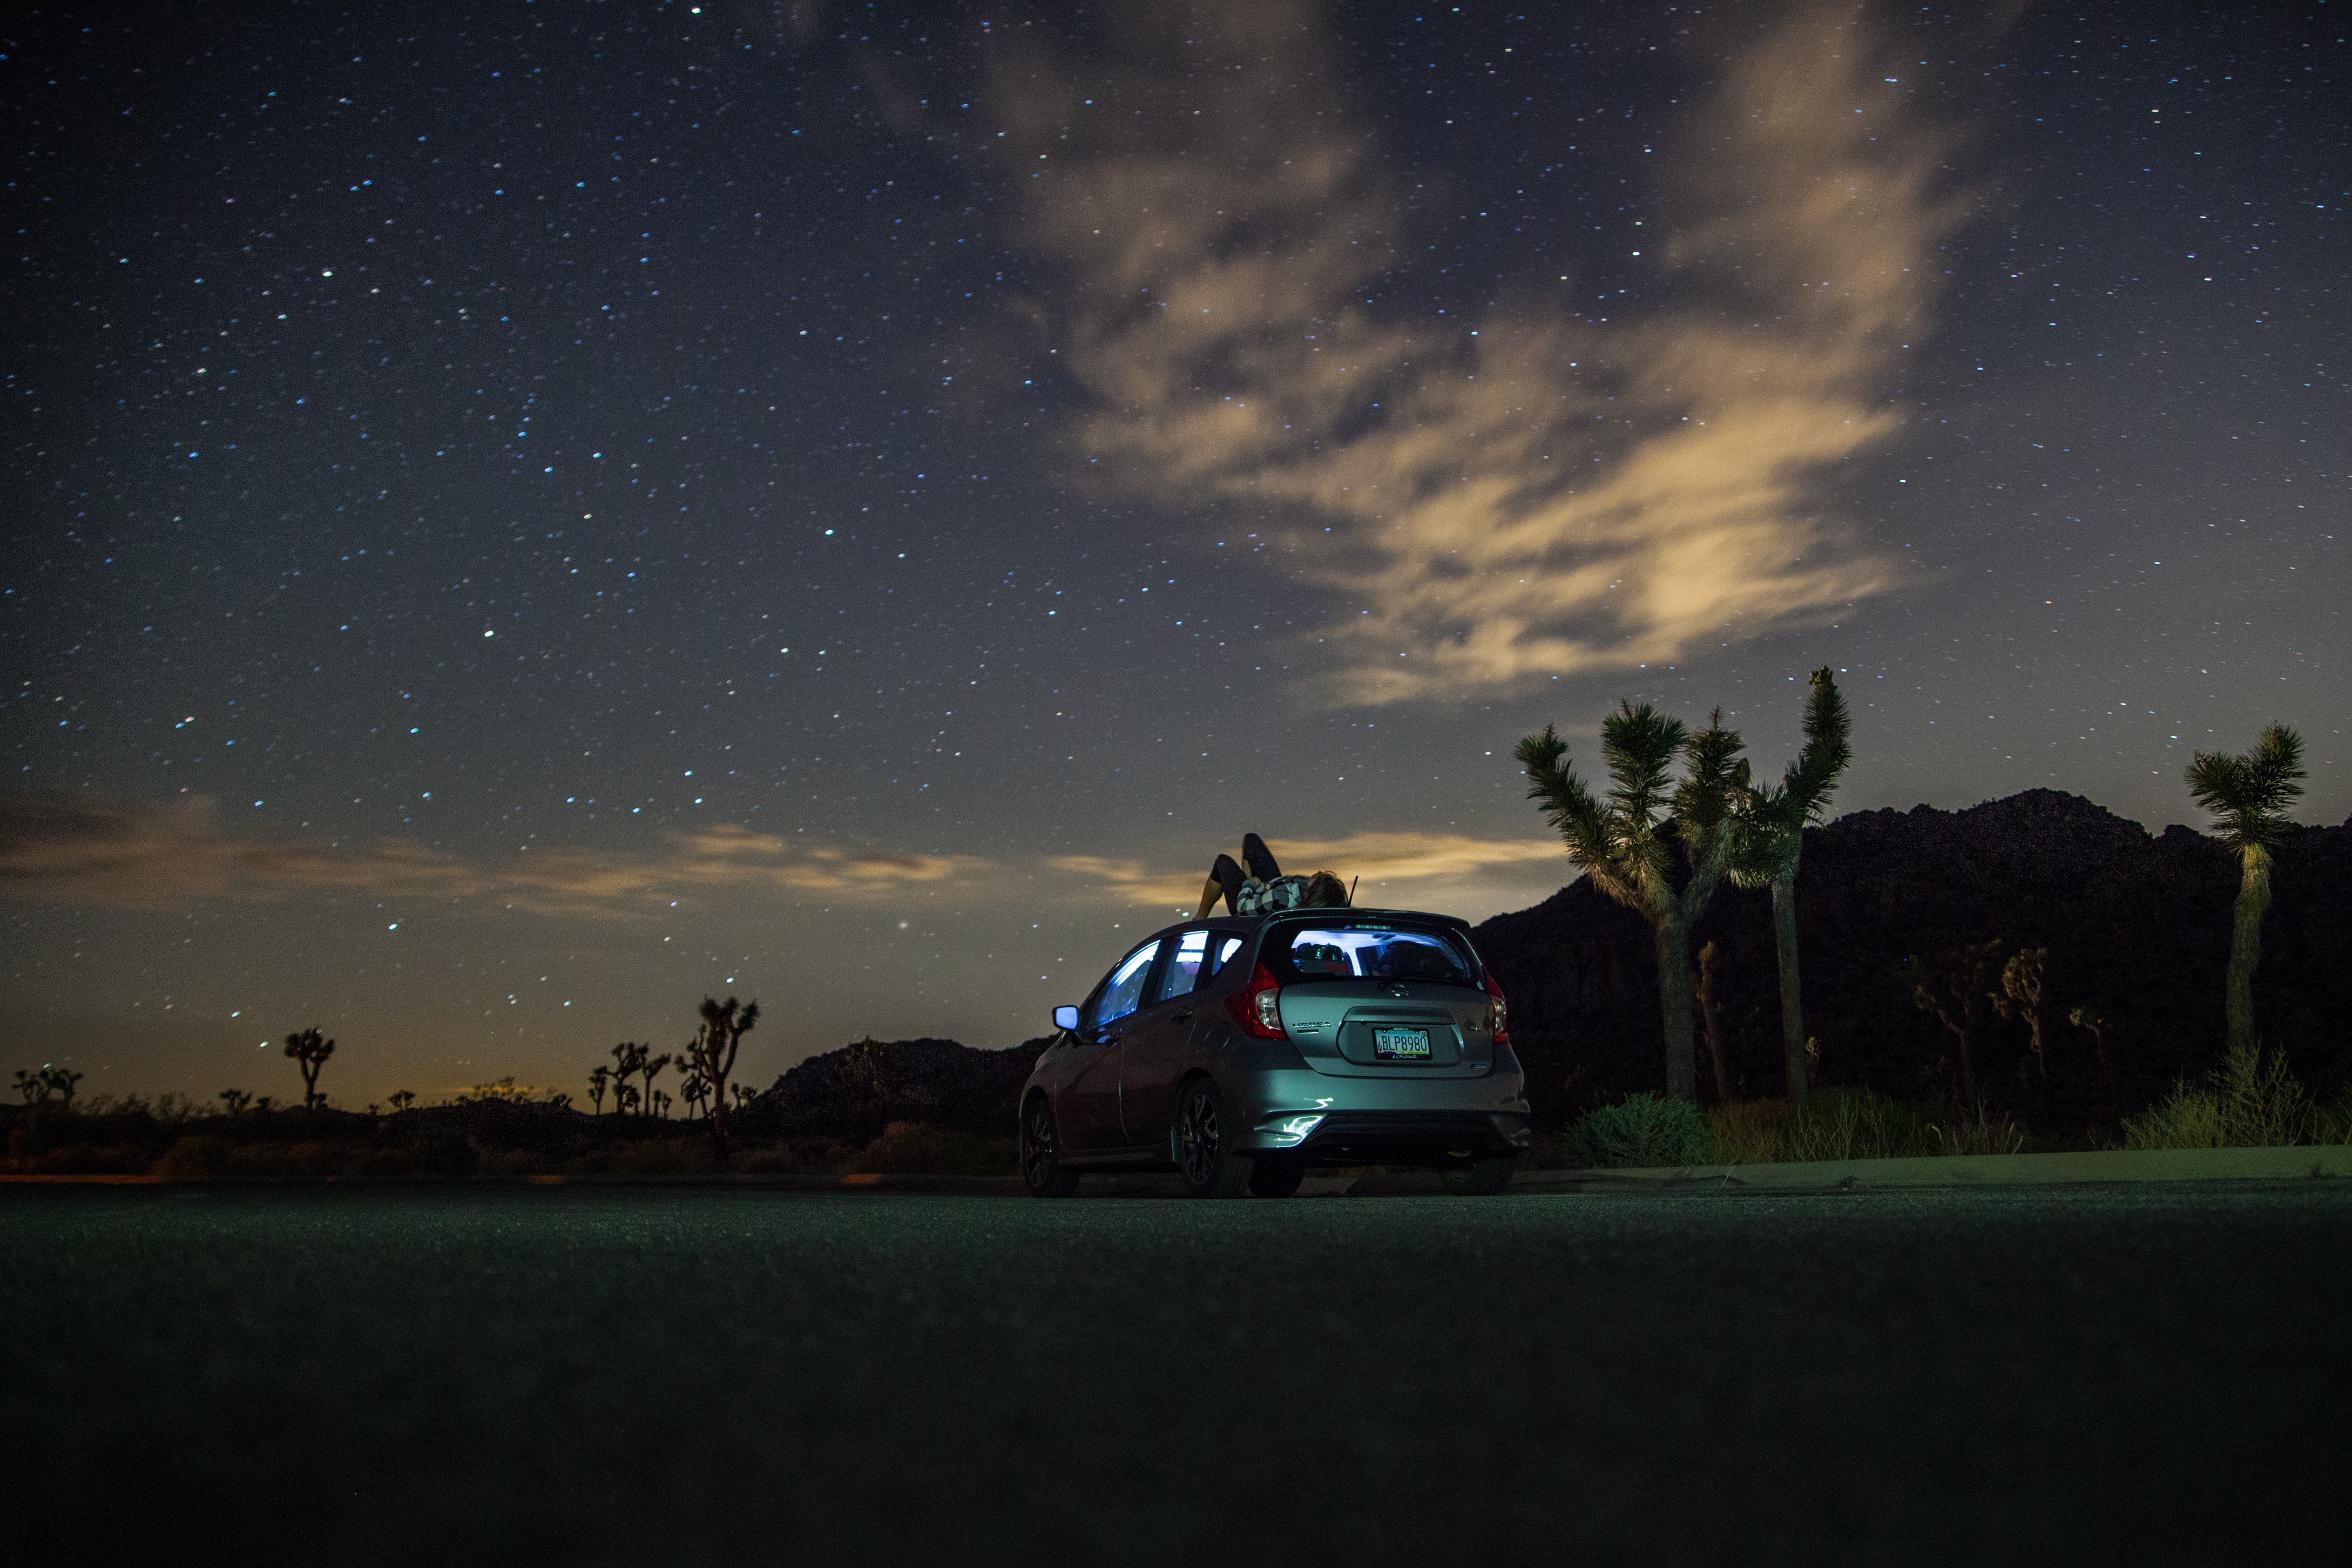 loneliness, human, privacy, palms, cars, seclusion, car, starry sky, person Aesthetic wallpaper